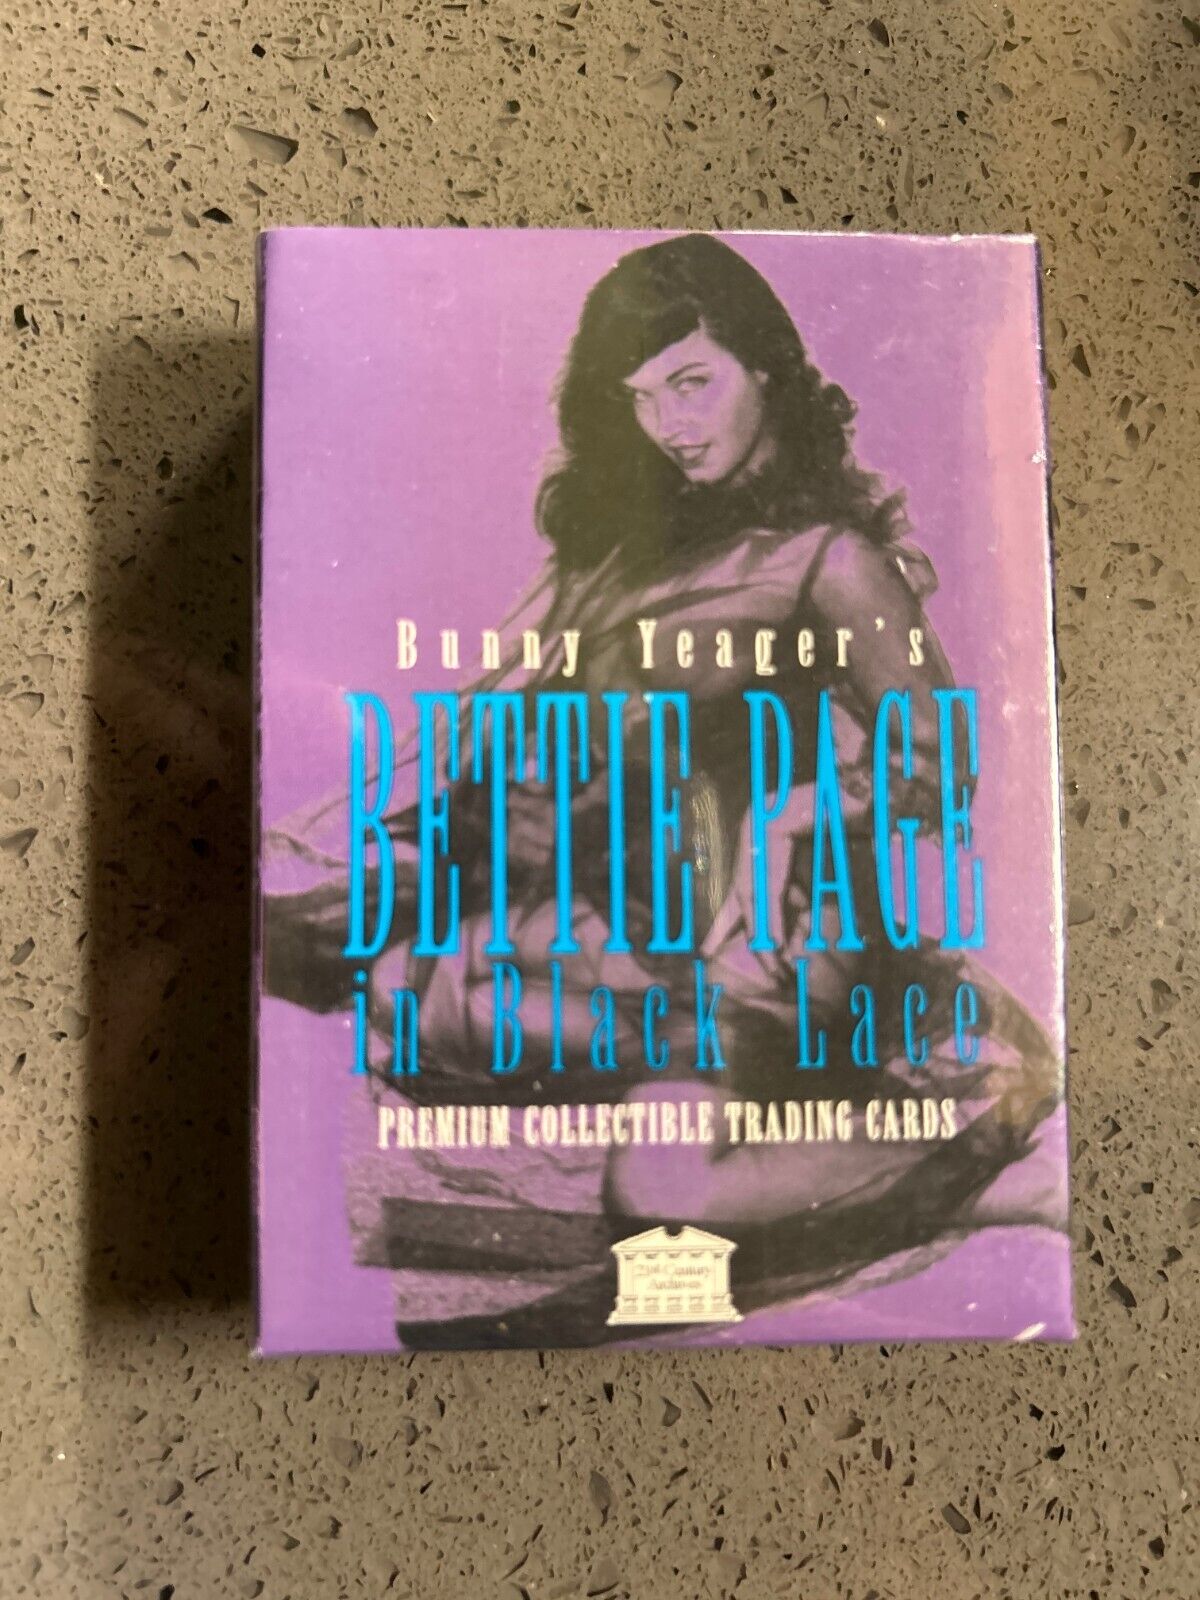 Vintage Bunny Yeager's Bettie Page In Black Lace Trading Card Set Sealed Box Set